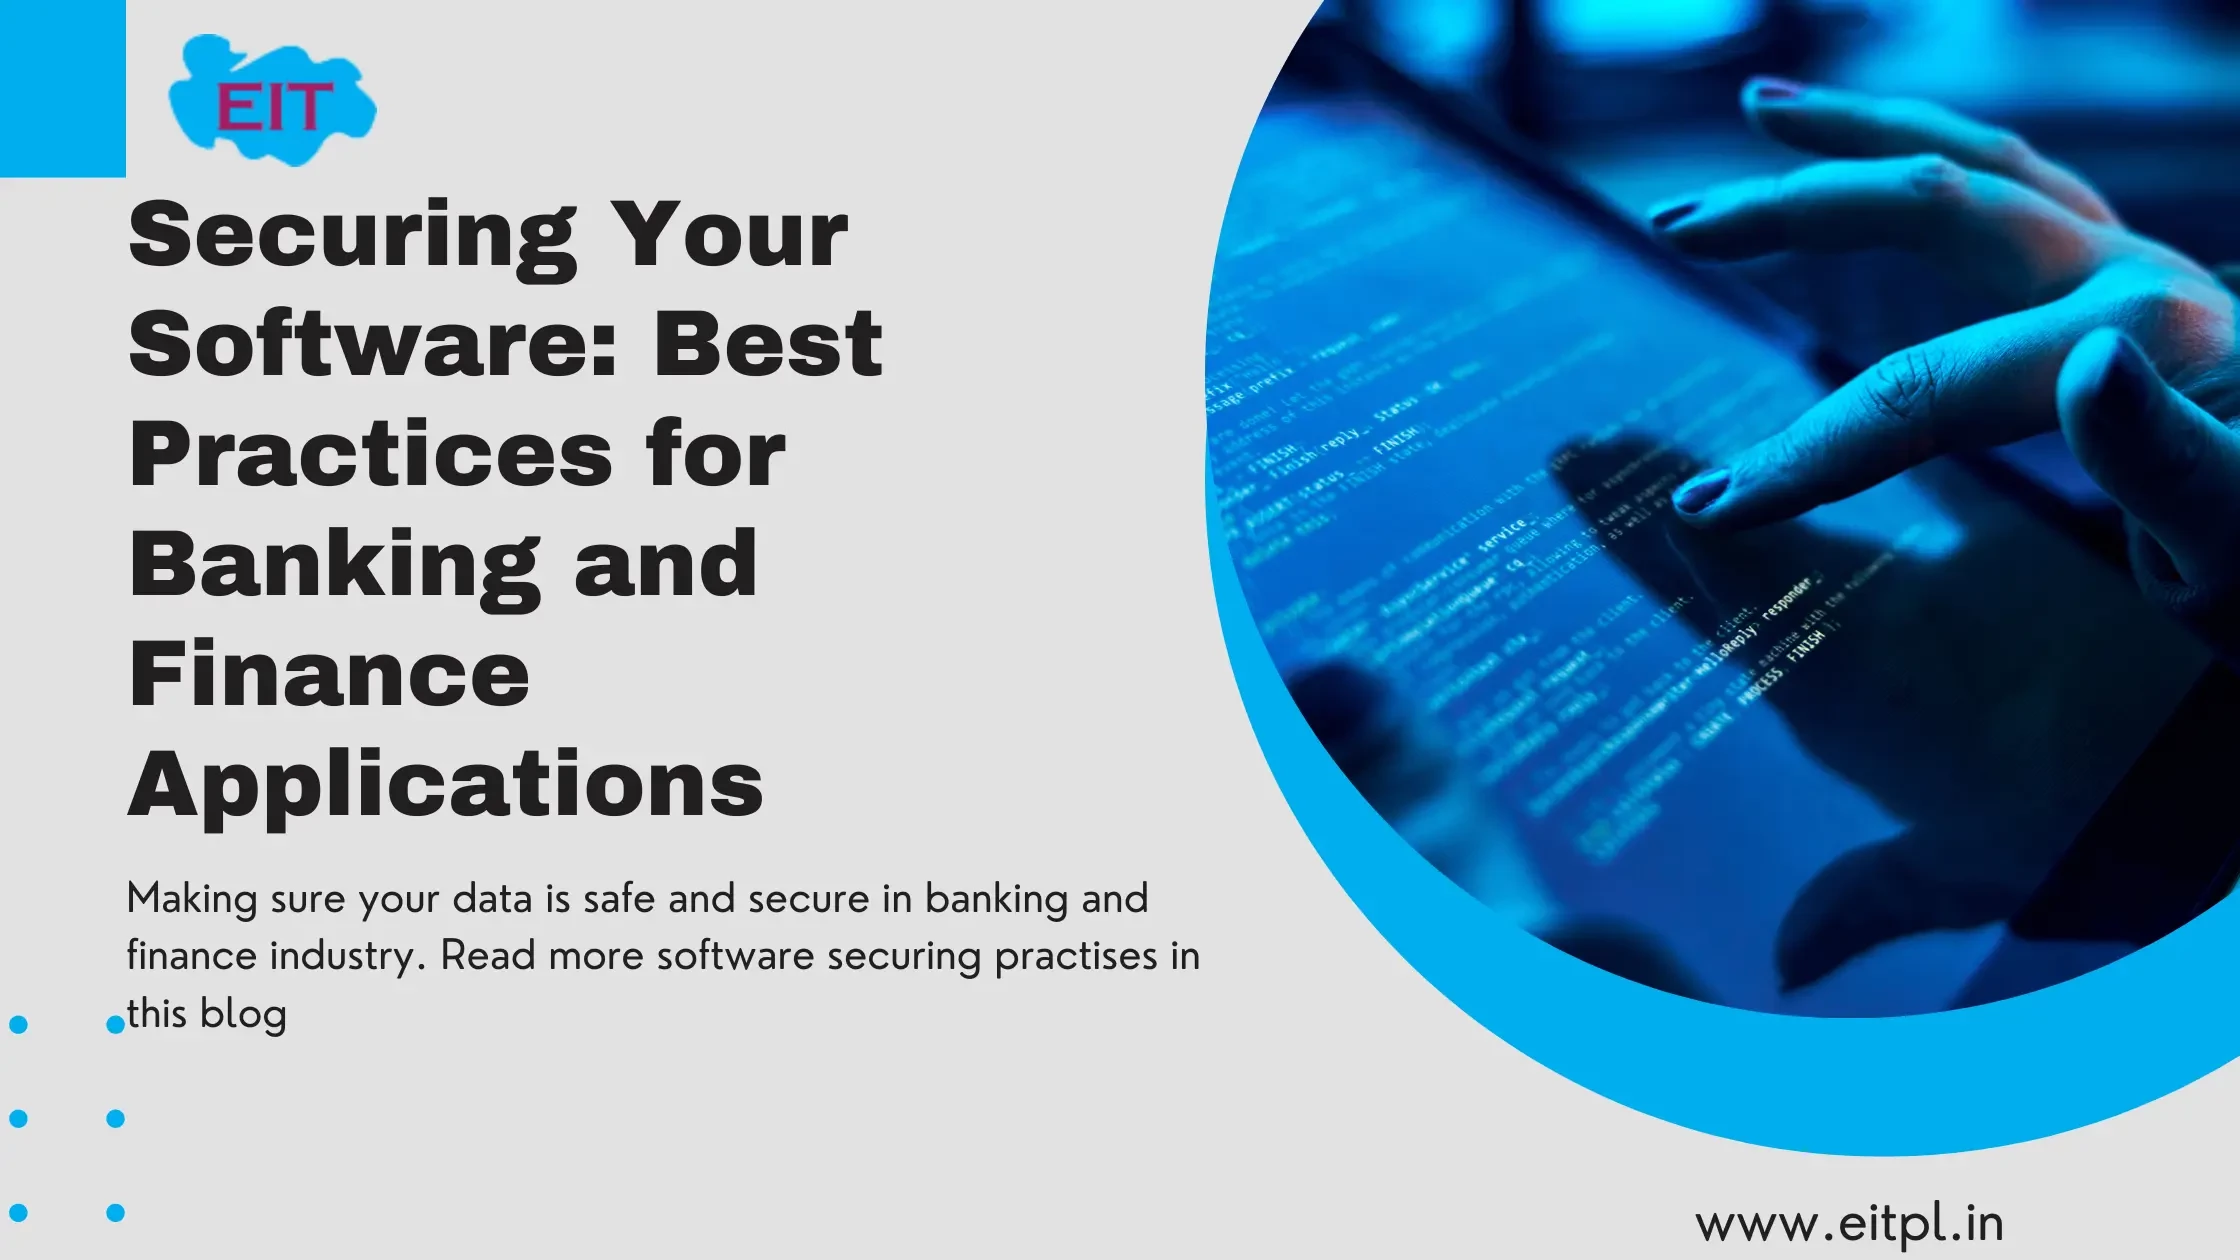 Software Security: Best Practices for Banking and Finance Applications